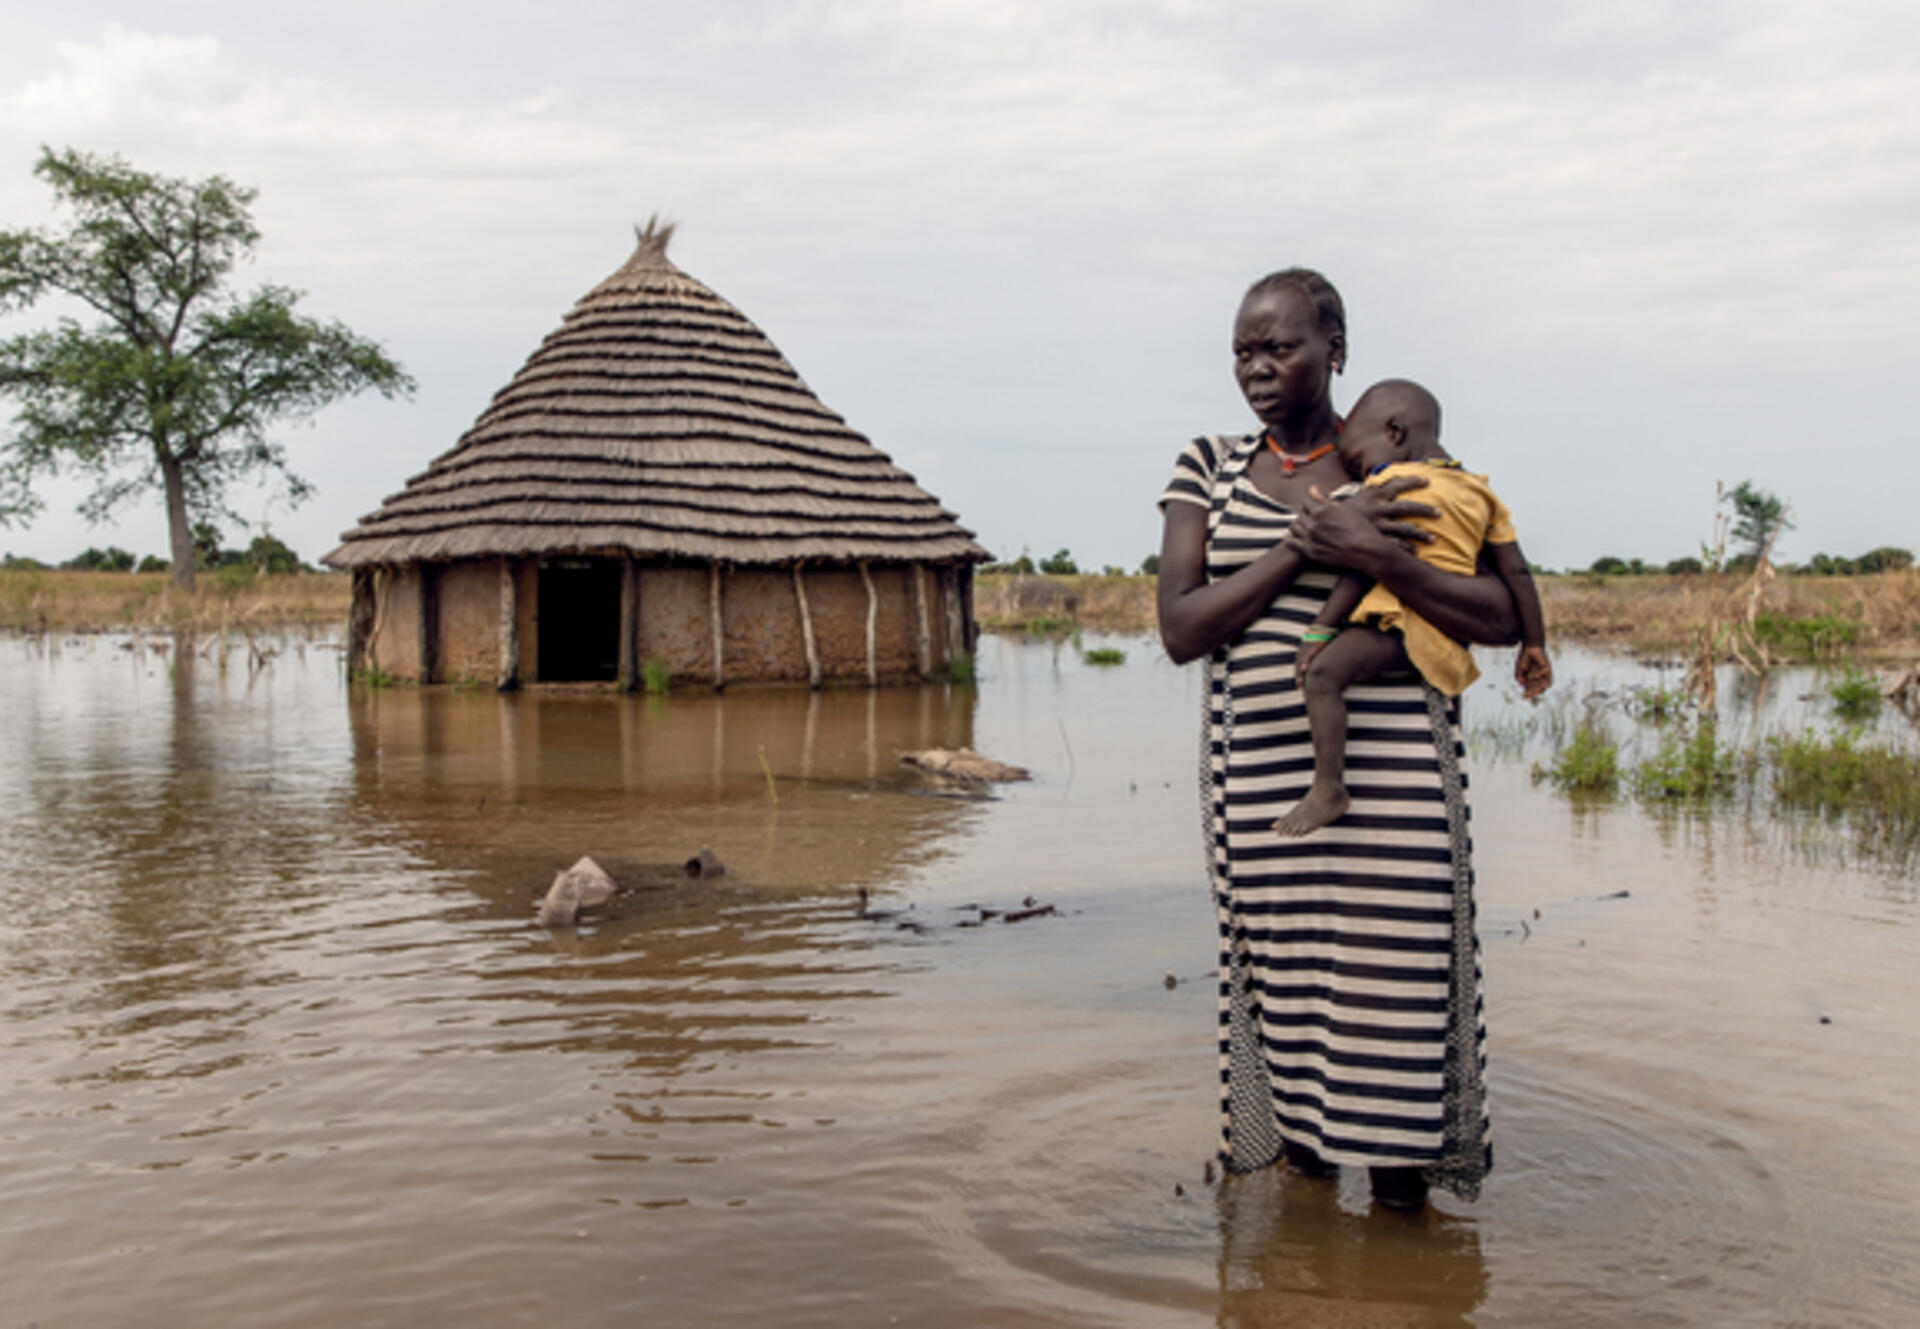 A mother carries her baby amidst flooding in South Sudan